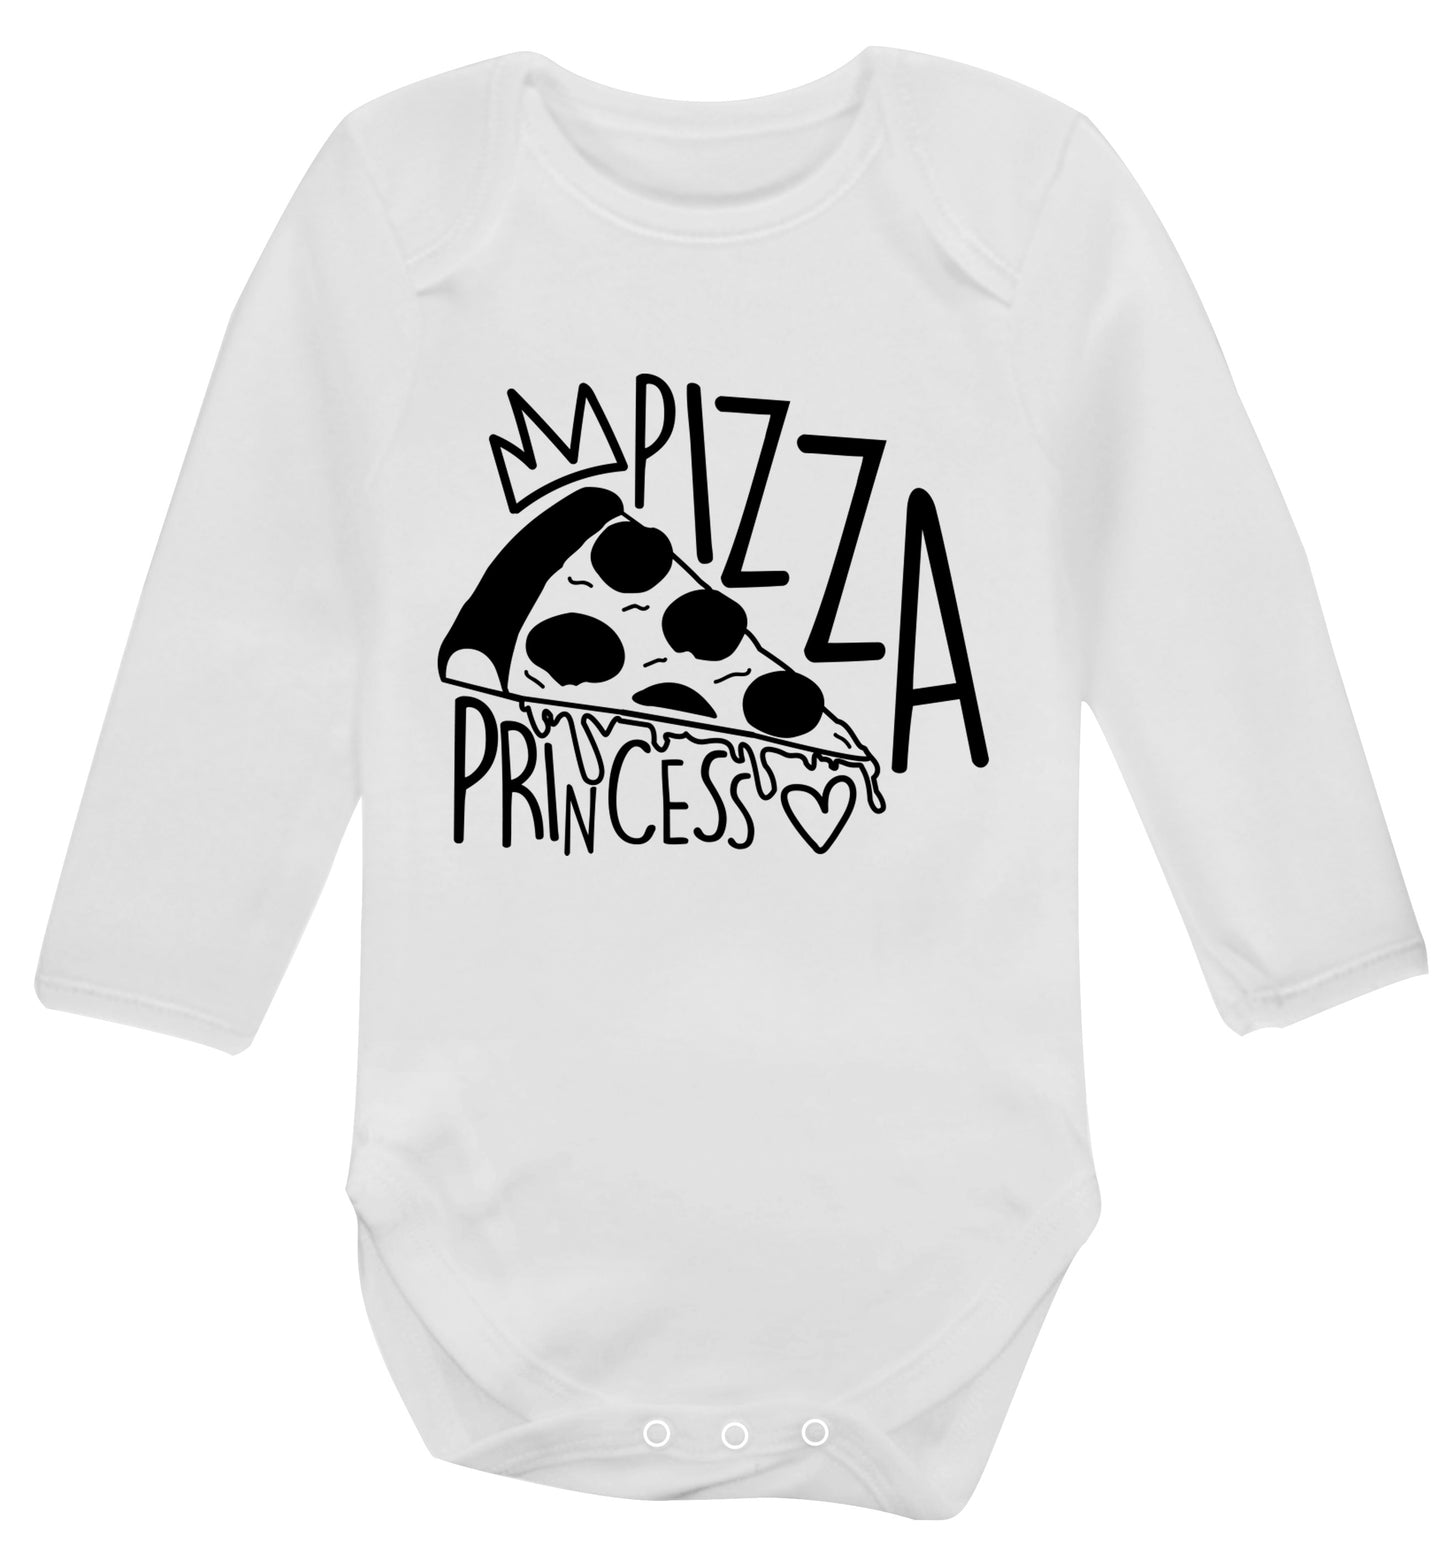 Pizza Princess Baby Vest long sleeved white 6-12 months